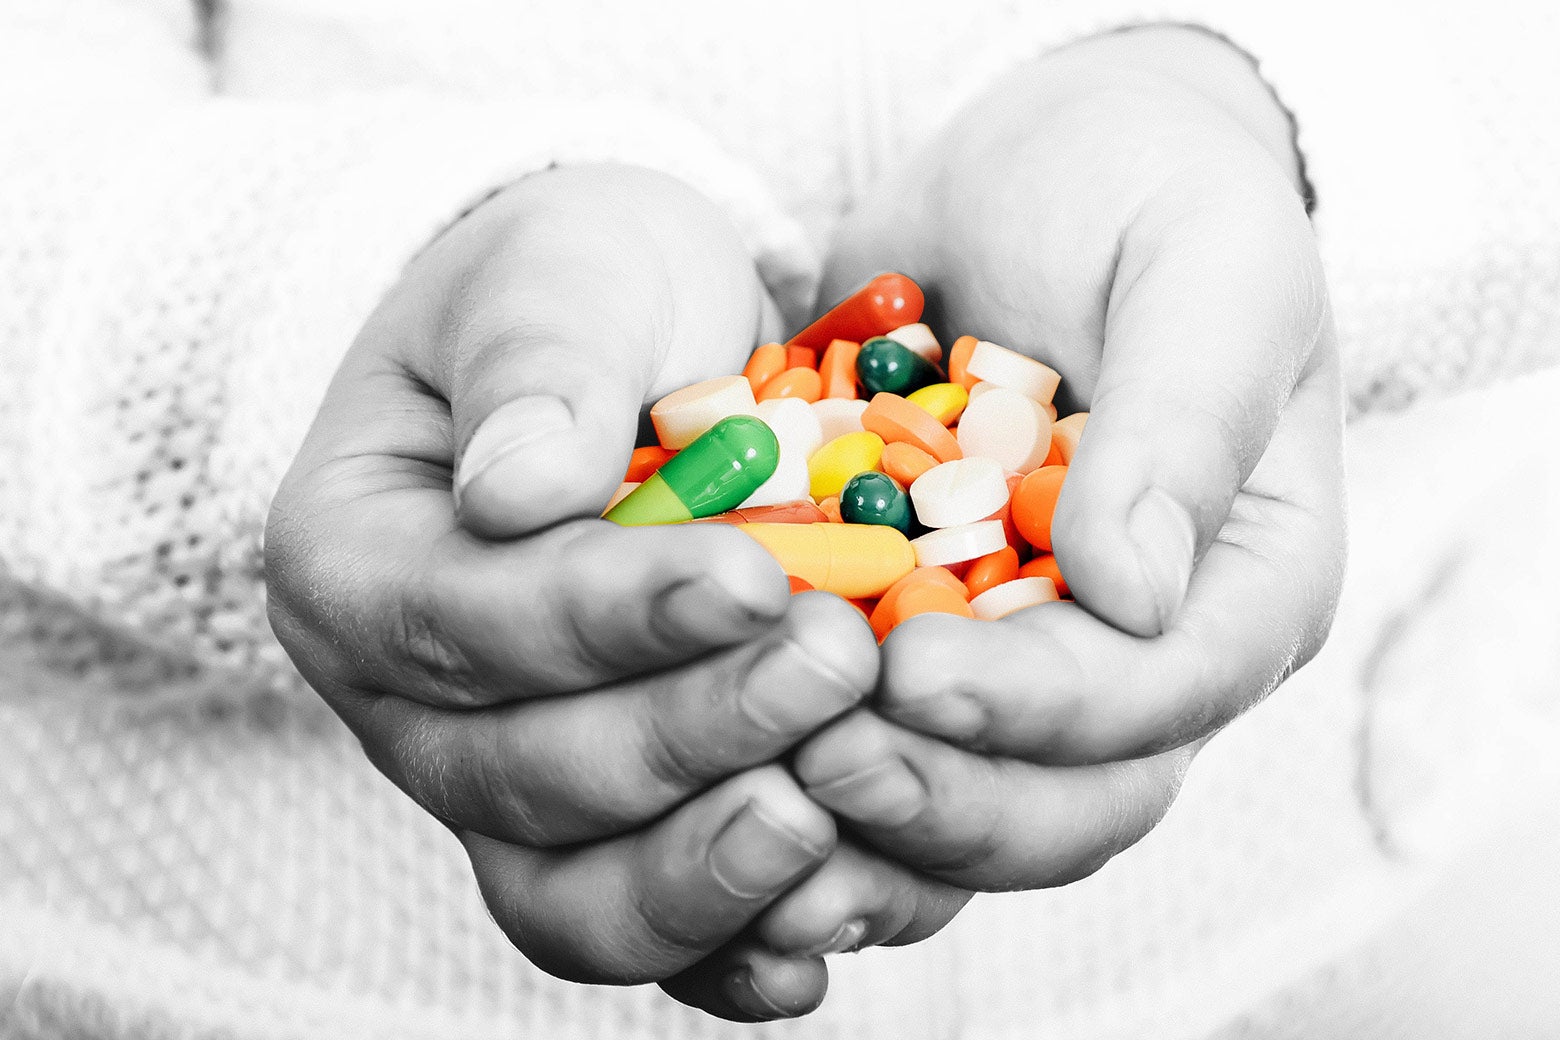 A child's hands cupping a colorful assortment of prescription pills.